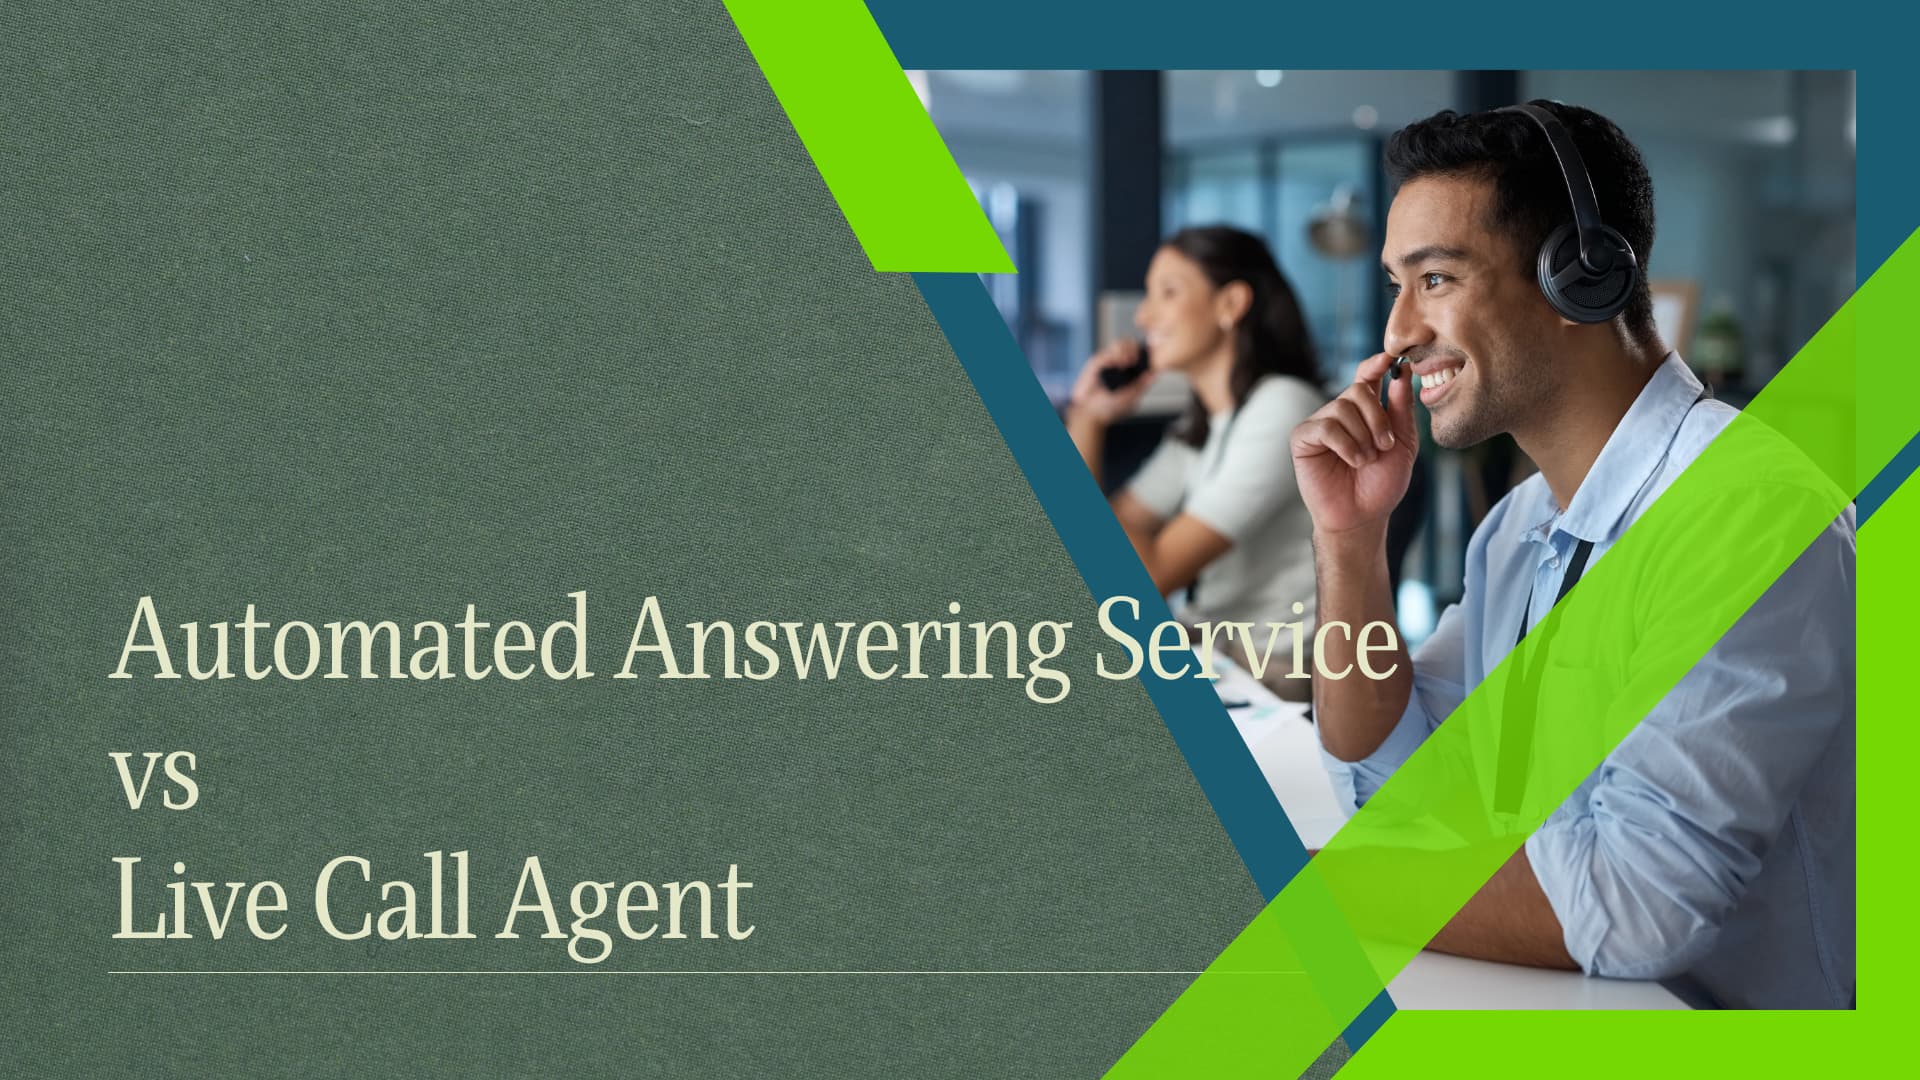 Automated Answering Service Vs Live Call Agent Infographic